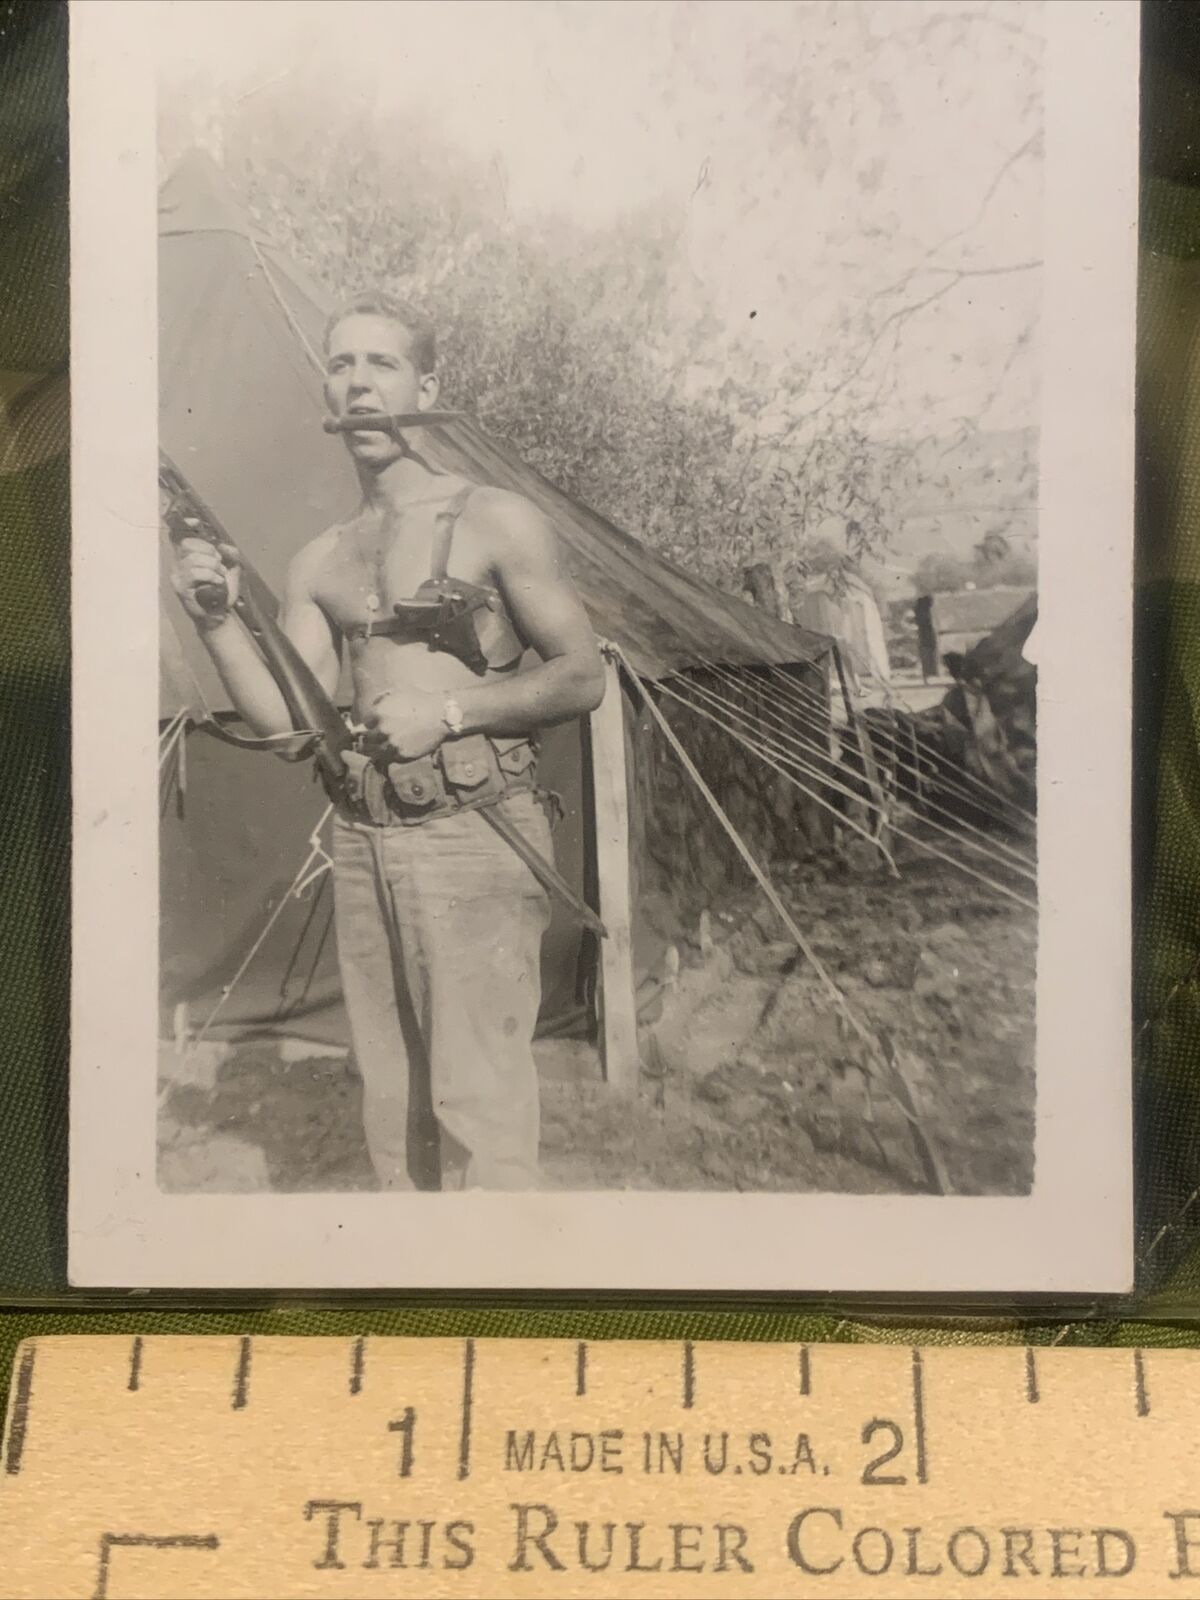 WW2 US ARMY SOLDIER WITH CAPTURED GERMAN PISTOL,BOOT KNIFE AND BAYONET,SNAPSHOT